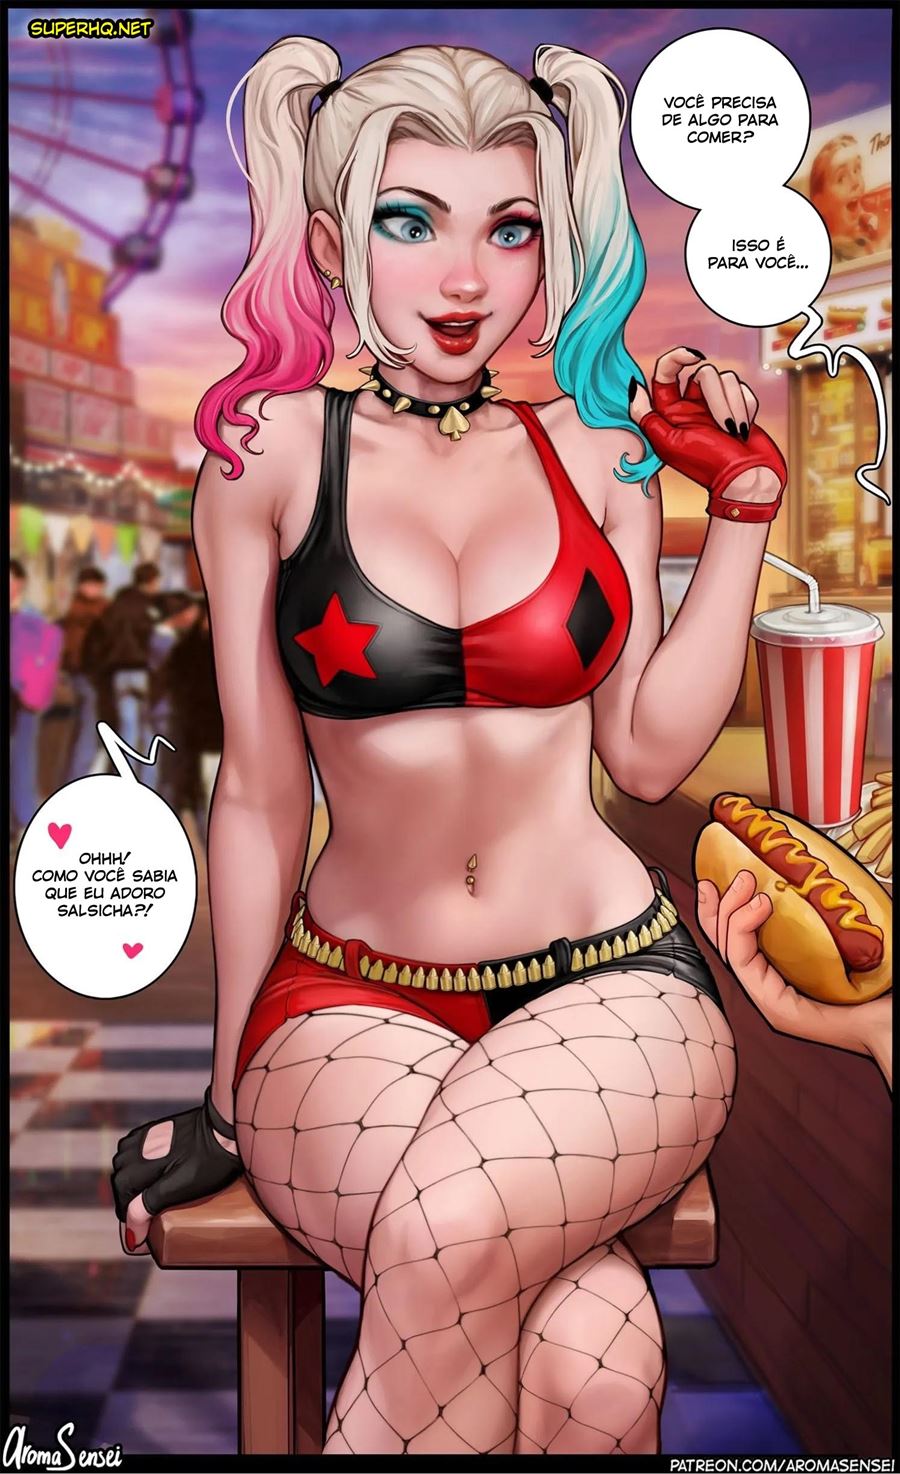 A date with Harley